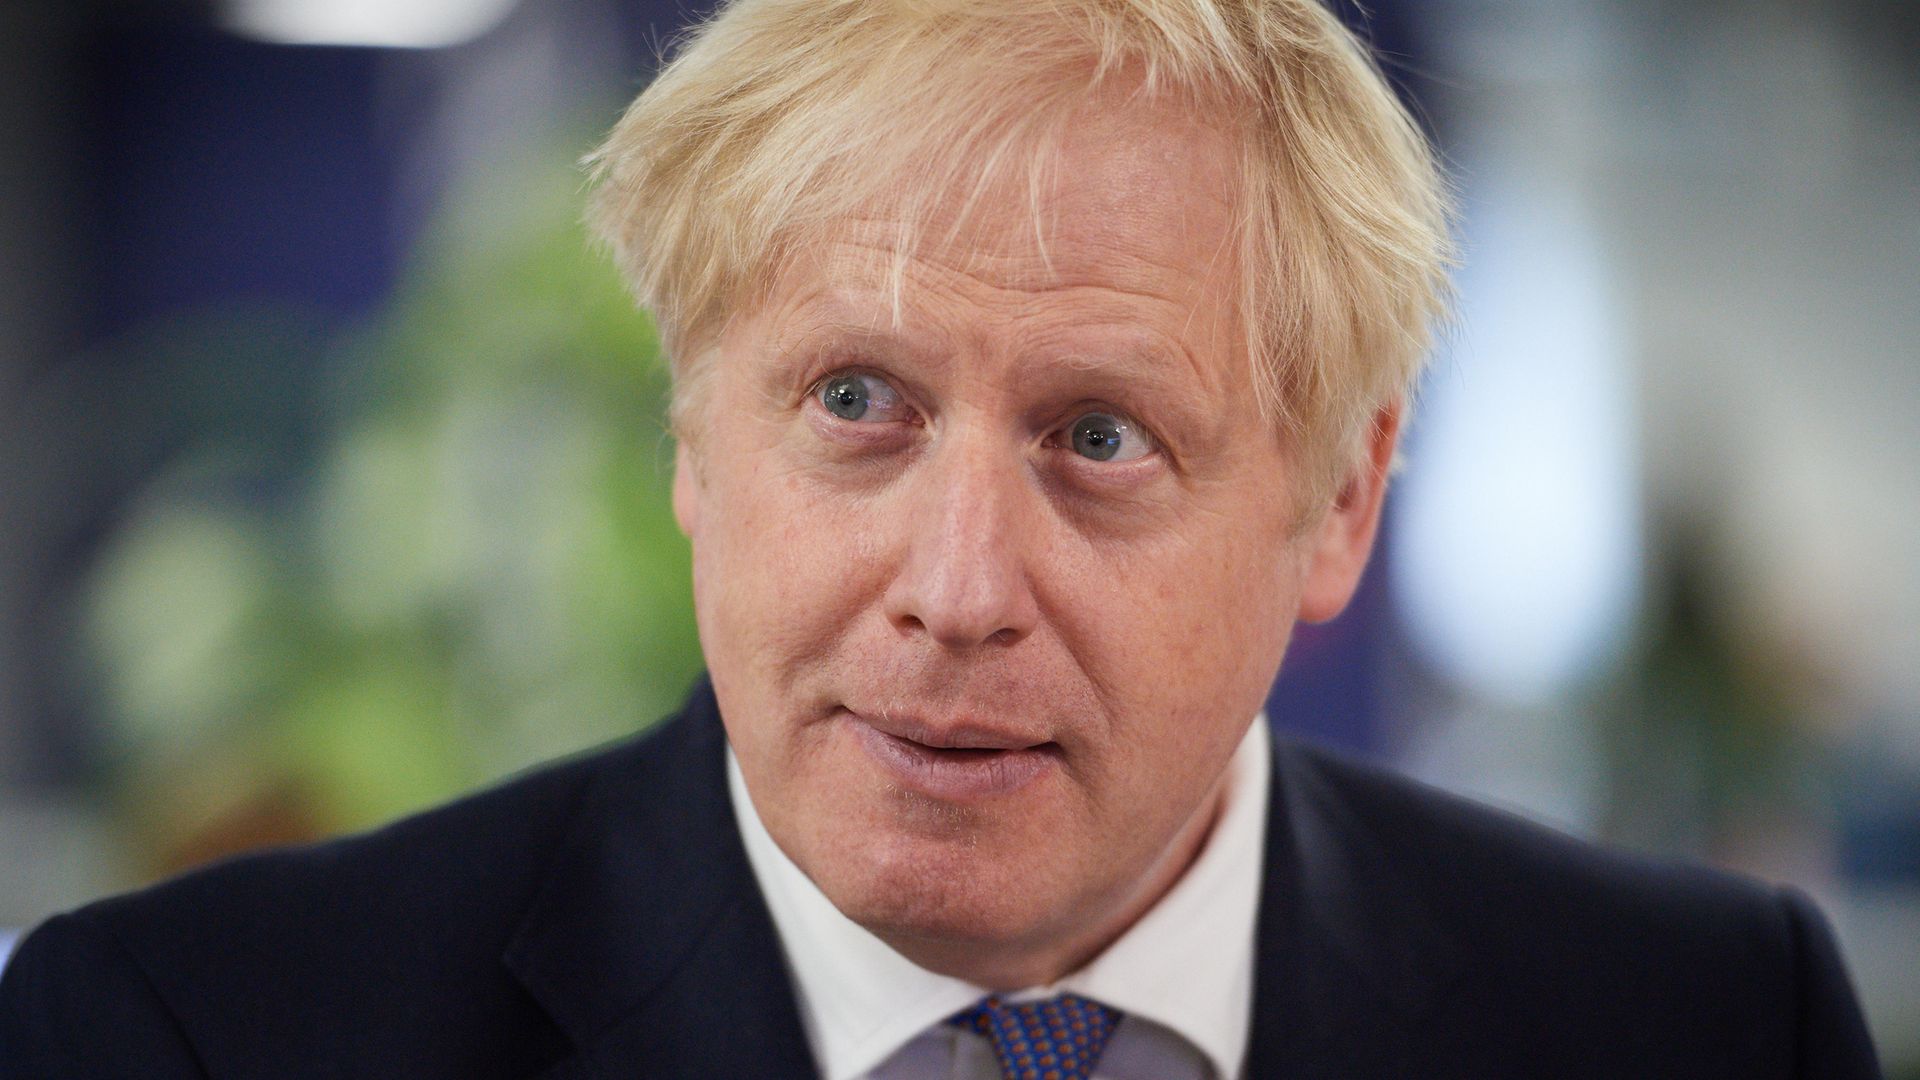 Prime minister Boris Johnson during a visit to the headquarters of Octopus Energy in London. - Credit: PA